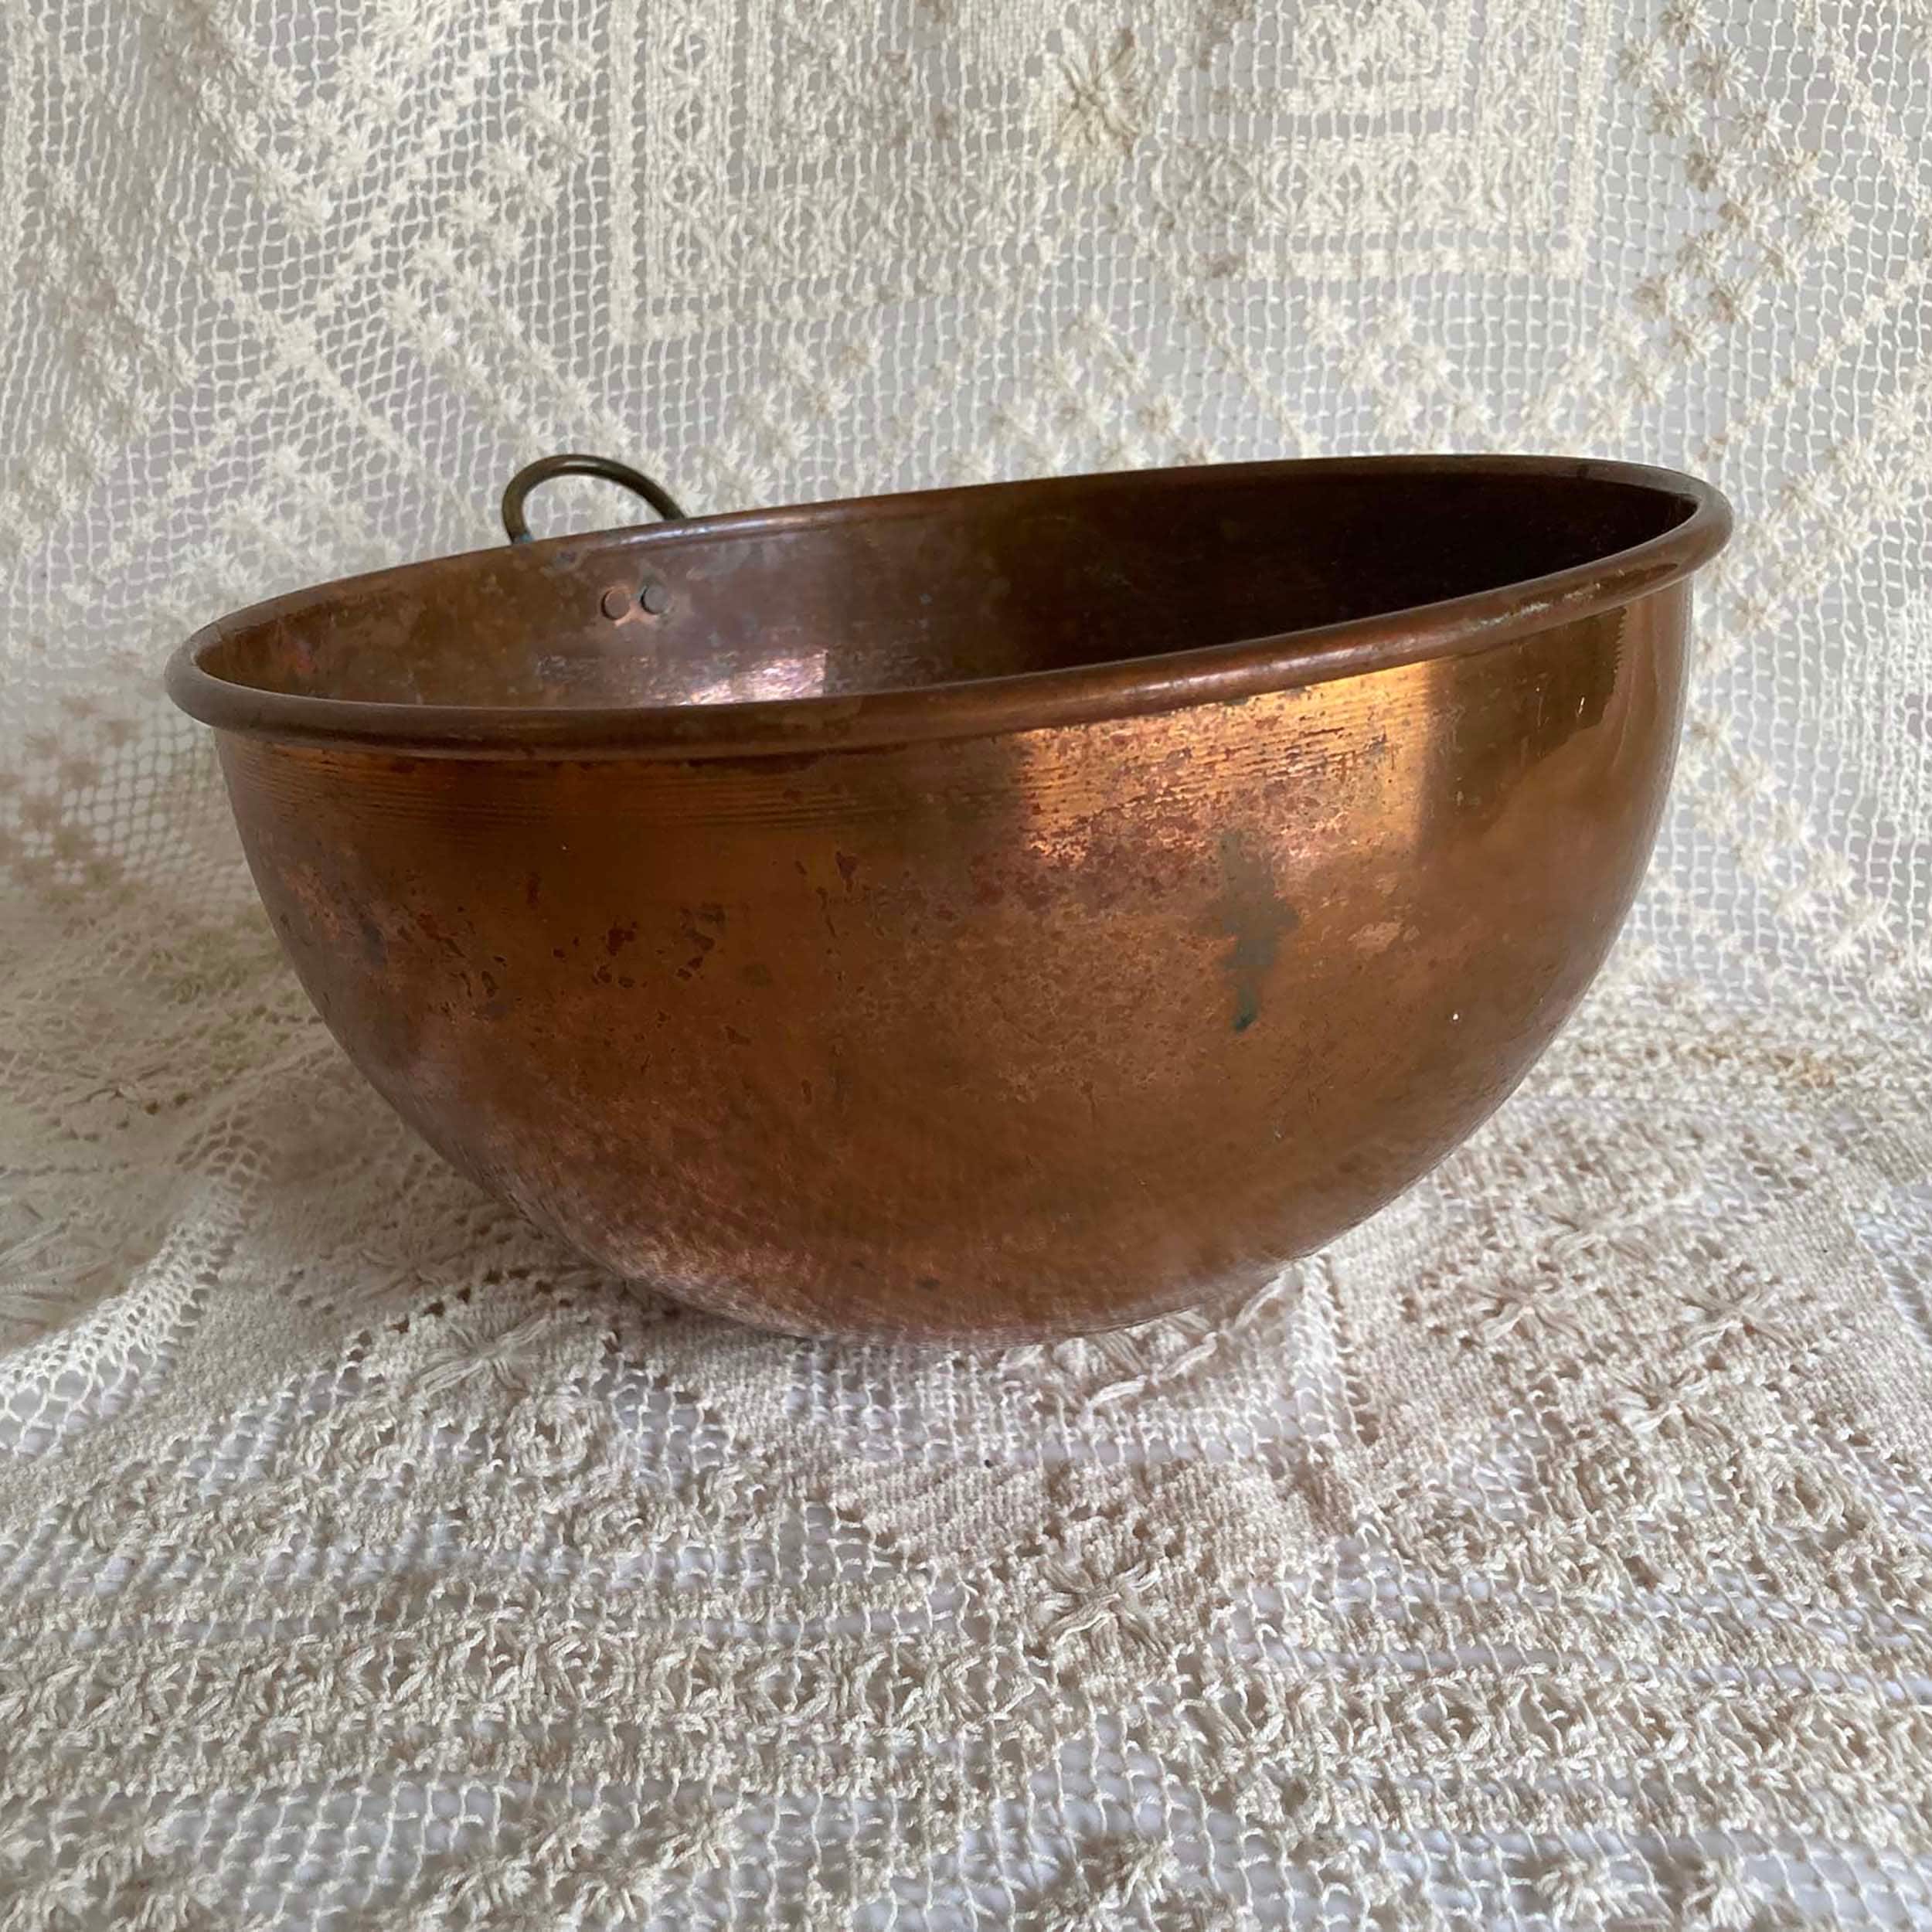 L. CADEC Copper Mixing Bowl, Vintage French Copper Bowl, From